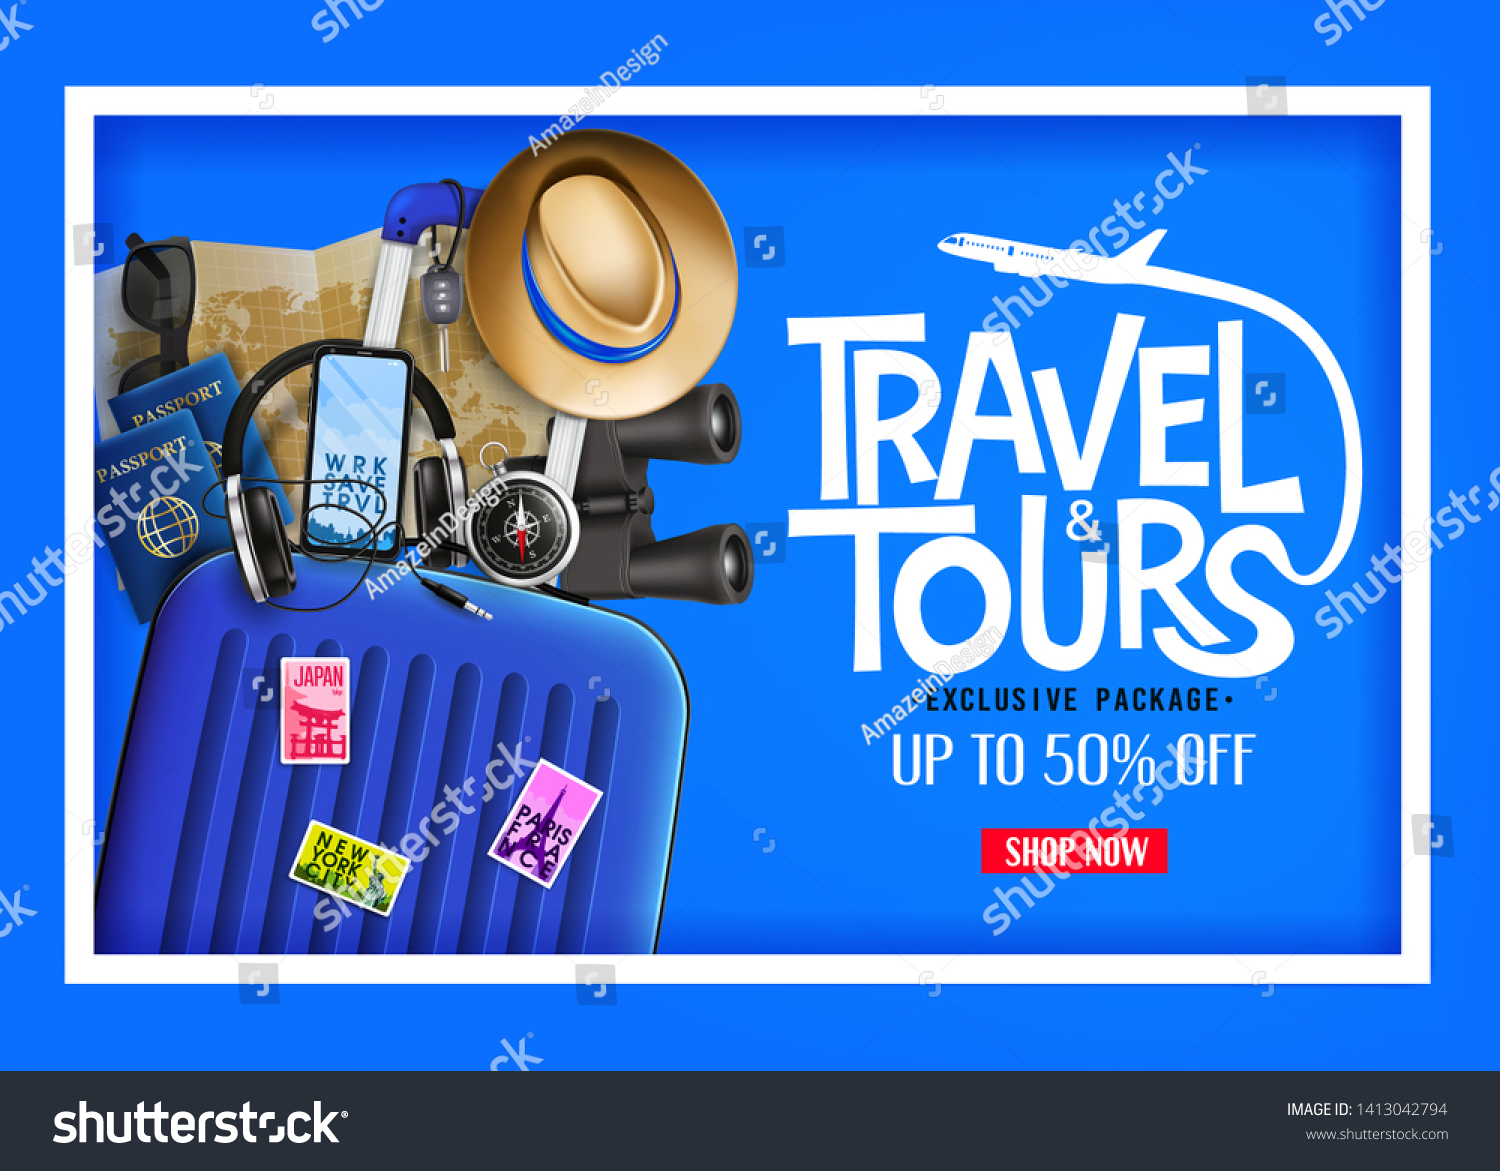 SVG of 3D Realistic Travel & Tours Ads Banner in Blue Background with Blue Traveling Bag and other Elements. For Promotional Purposes
 svg